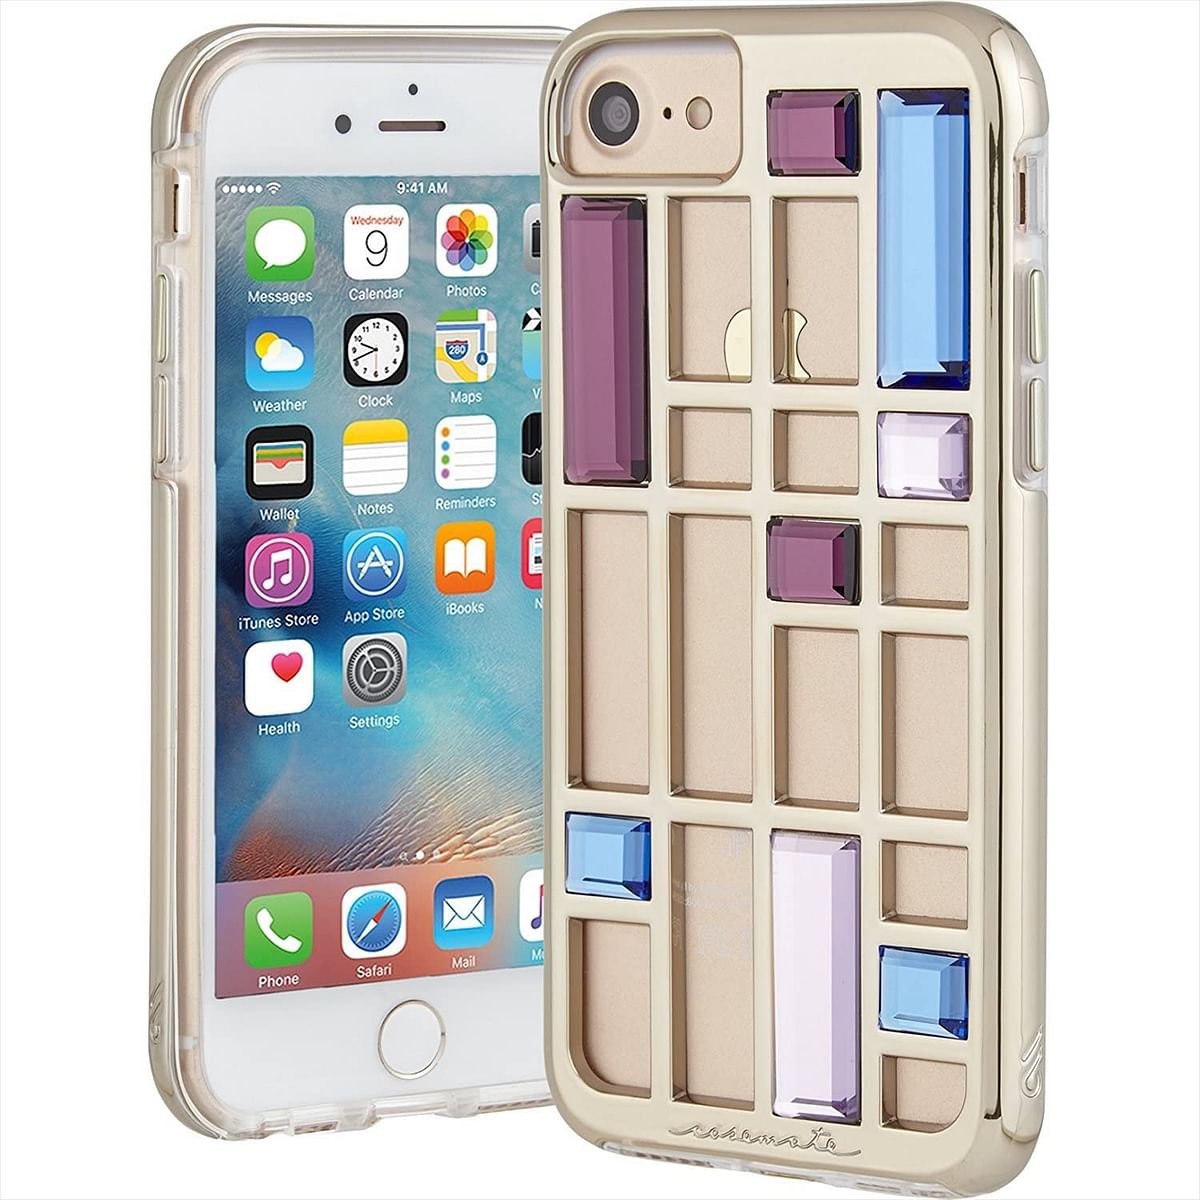 Case Mate Case-Mate Iphone 7 Caged Crystal Case - Gold - One Size